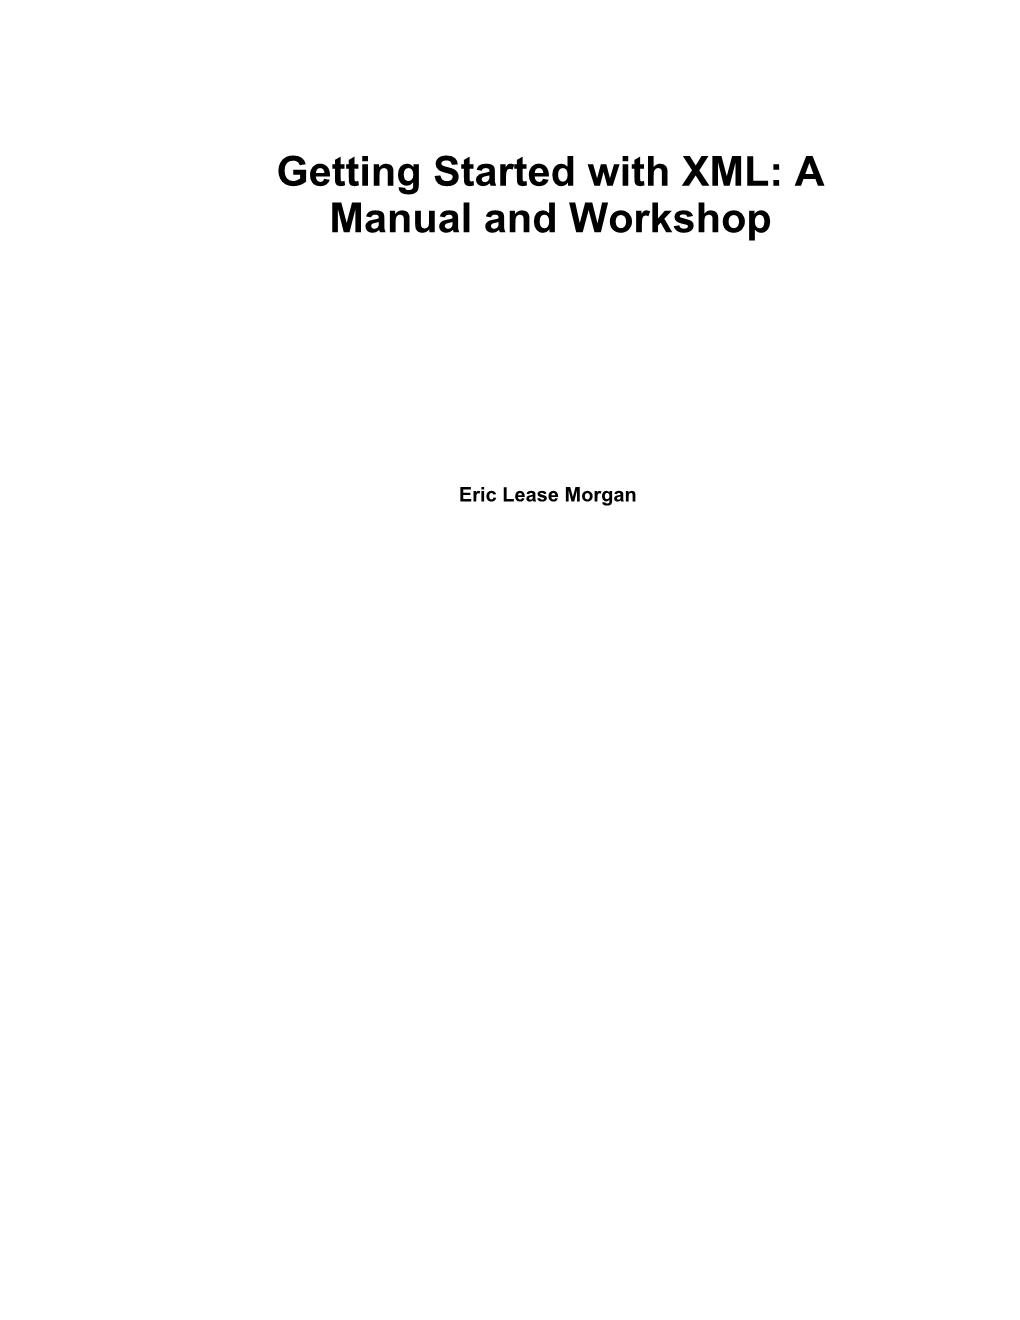 Getting Started with XML: a Manual and Workshop